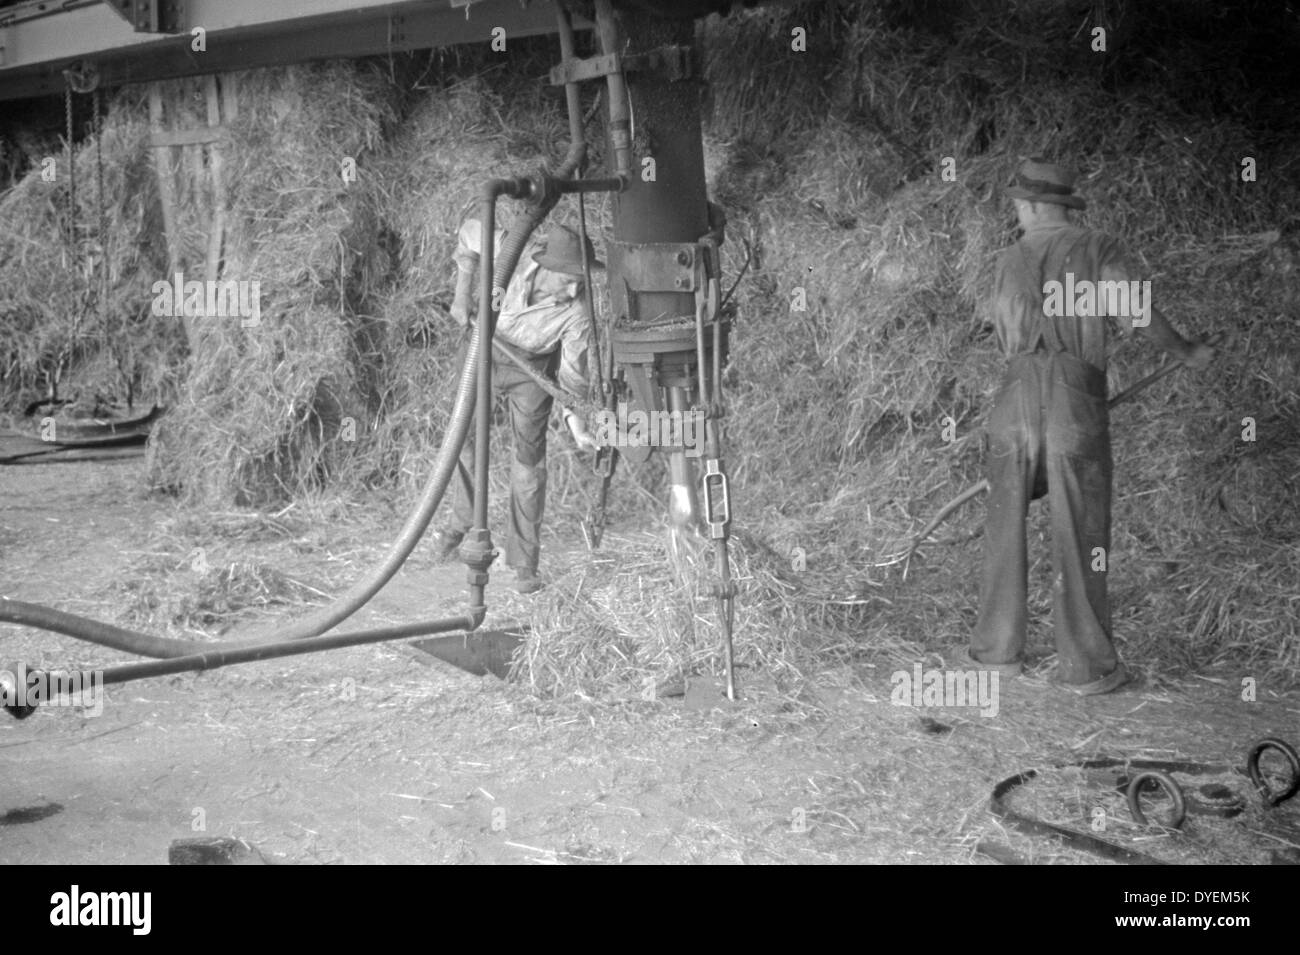 Baled straw to be used for making strawboard at Container Corporation of America plant, Circleville, Ohio. Date 1938 Summer. Stock Photo